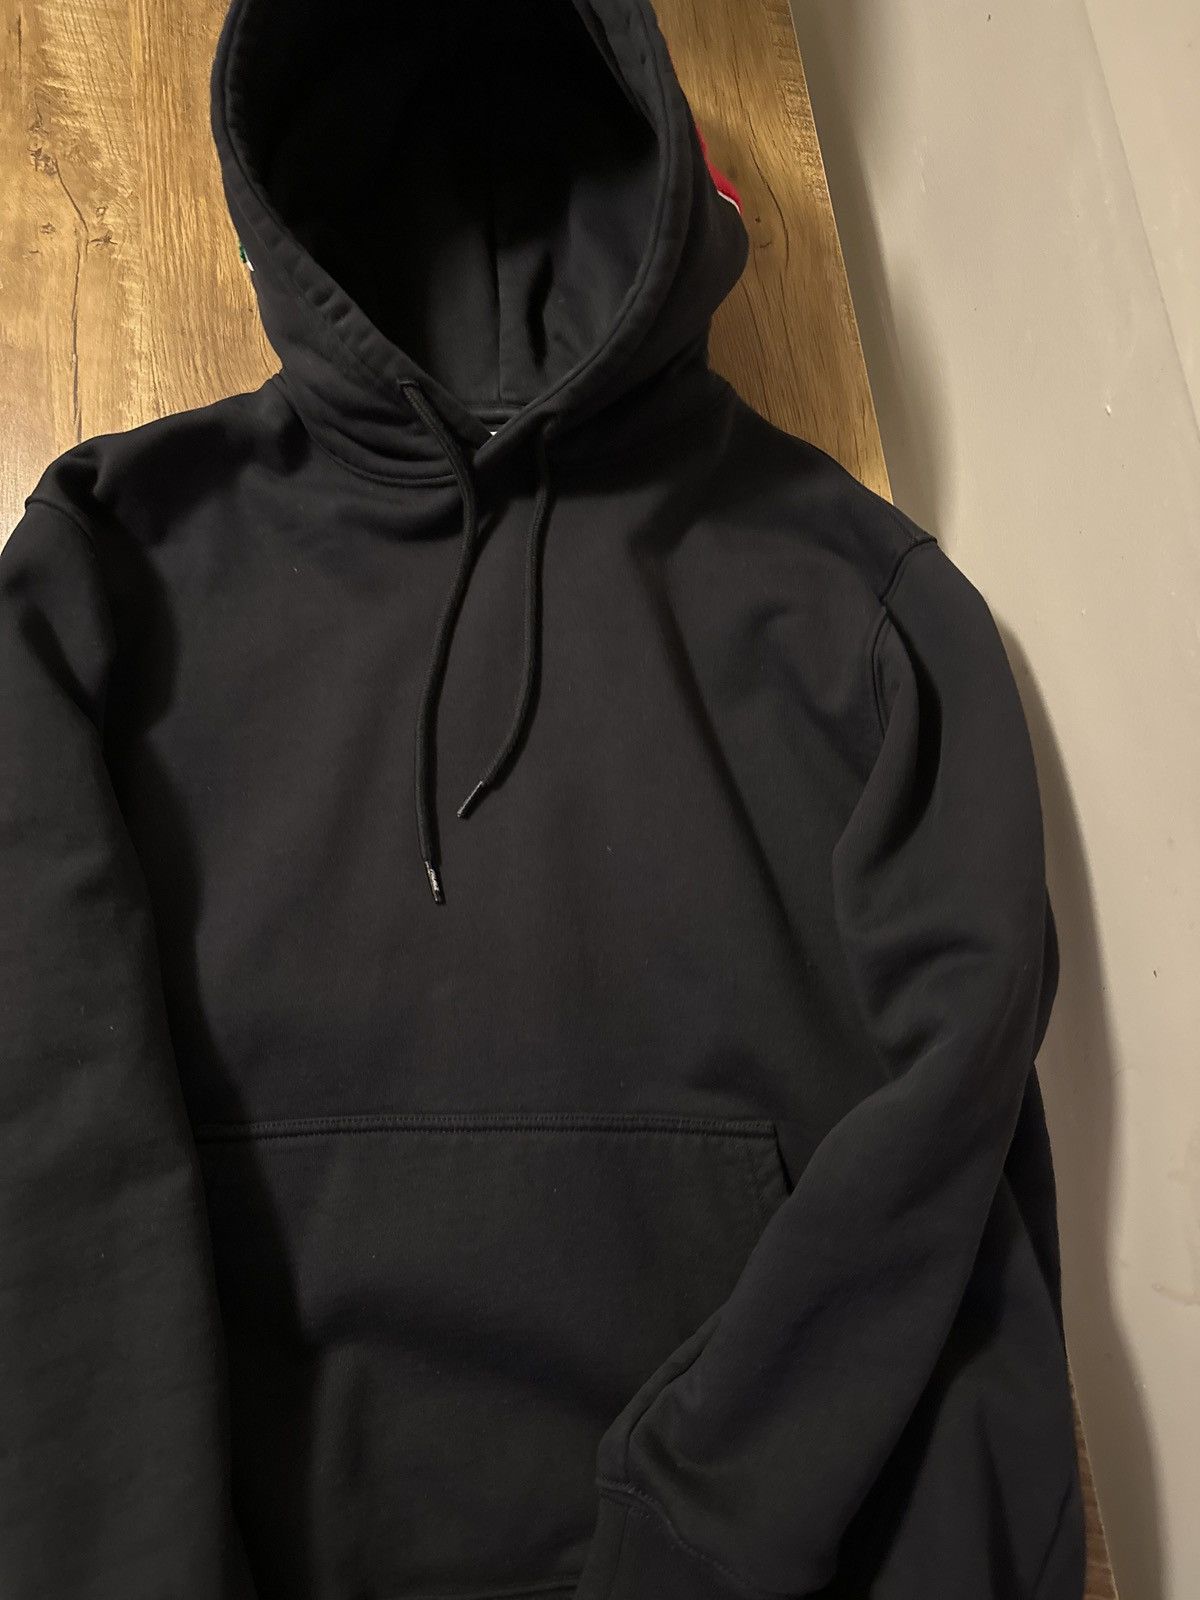 Palace Palace Spell-out Zip Hoodie | Grailed